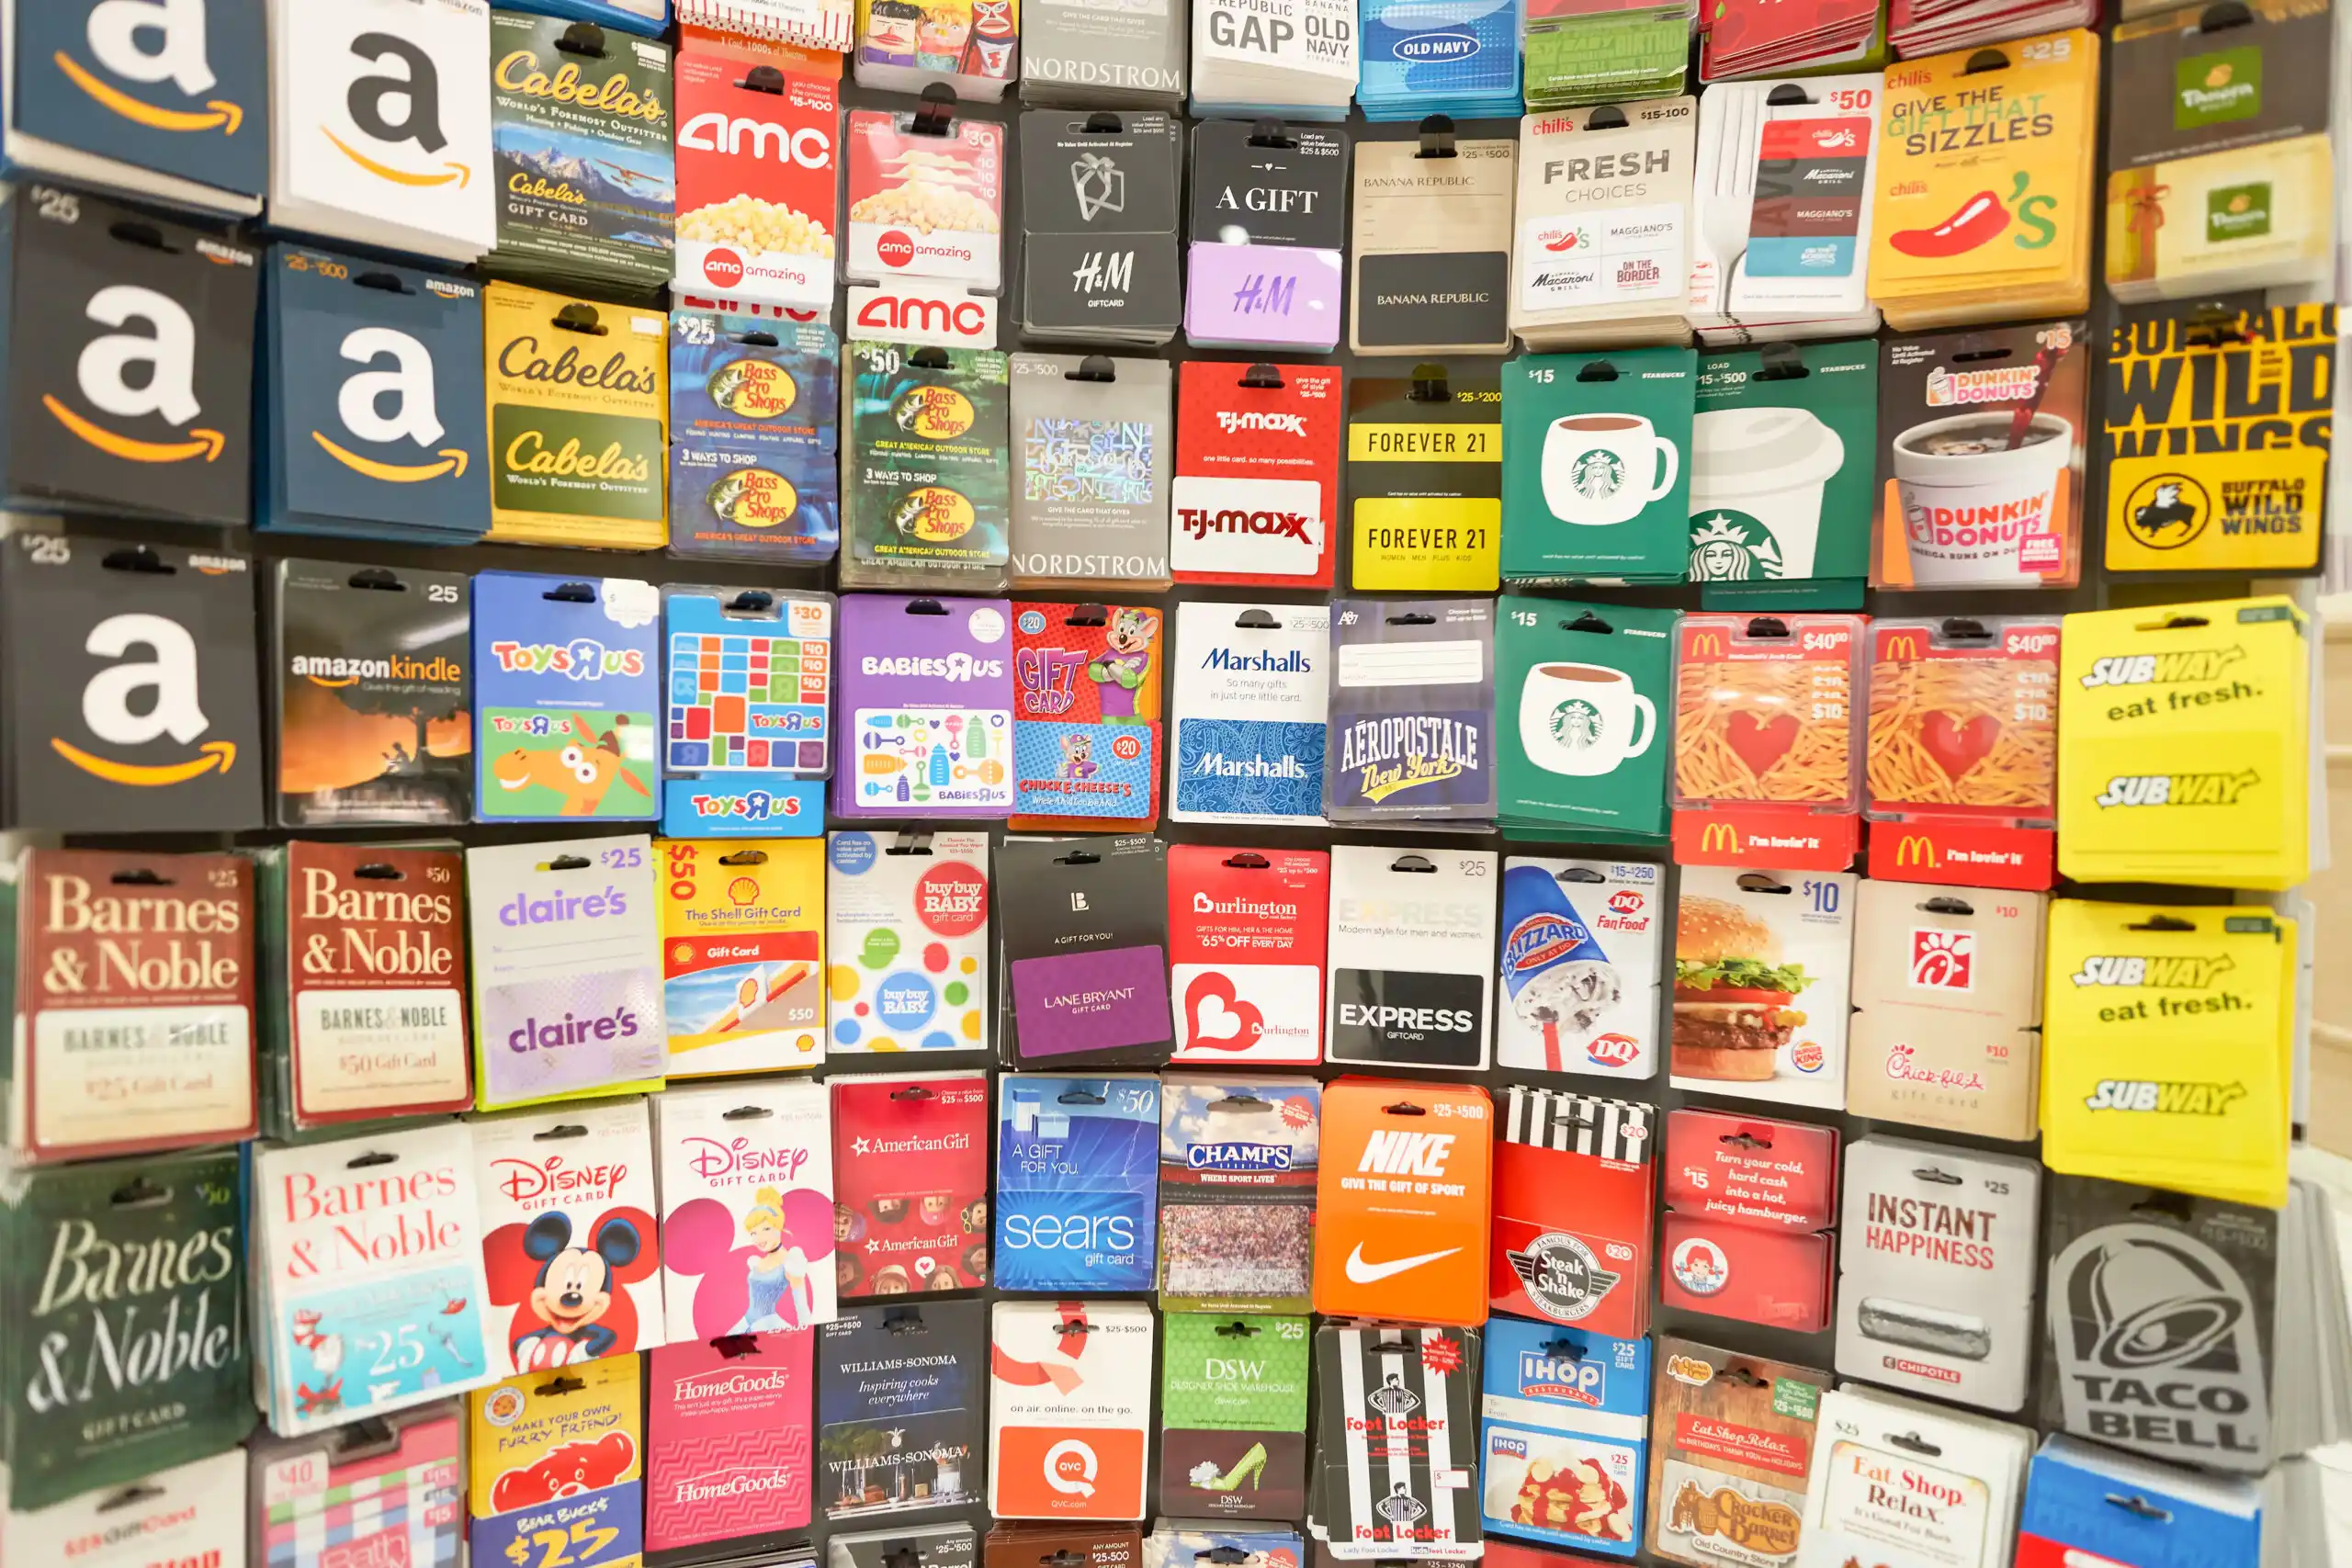 Don’t Fall For These Gift Card Scams Over The Holidays